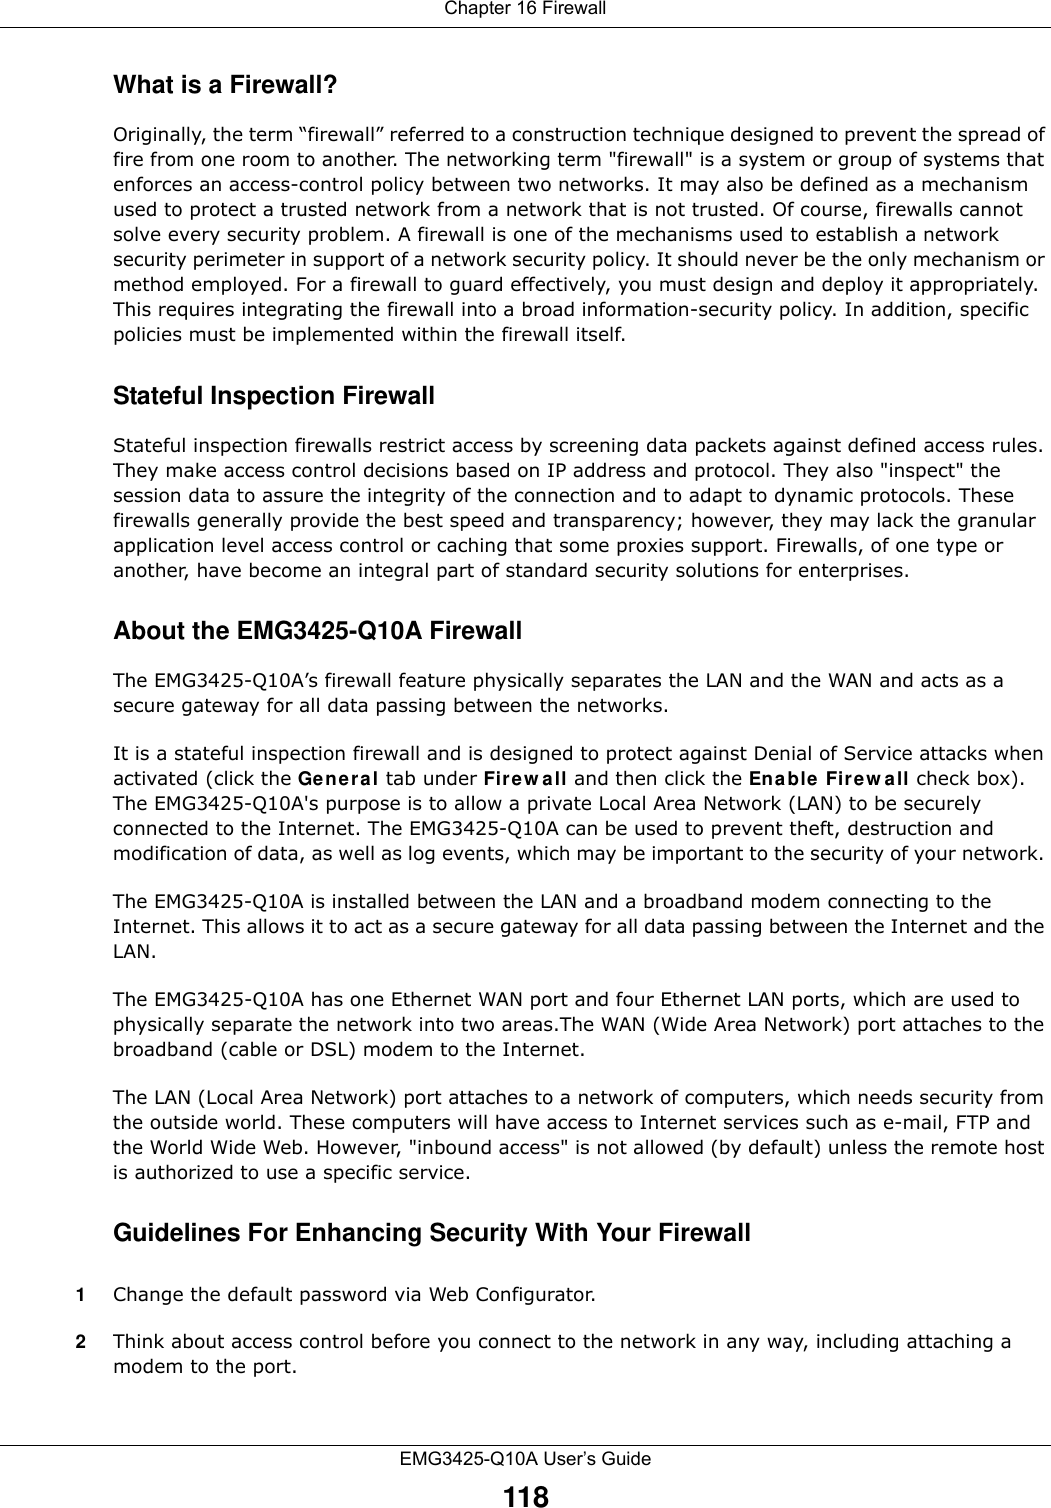 Chapter 16 FirewallEMG3425-Q10A User’s Guide118What is a Firewall?Originally, the term “firewall” referred to a construction technique designed to prevent the spread of fire from one room to another. The networking term &quot;firewall&quot; is a system or group of systems that enforces an access-control policy between two networks. It may also be defined as a mechanism used to protect a trusted network from a network that is not trusted. Of course, firewalls cannot solve every security problem. A firewall is one of the mechanisms used to establish a network security perimeter in support of a network security policy. It should never be the only mechanism or method employed. For a firewall to guard effectively, you must design and deploy it appropriately. This requires integrating the firewall into a broad information-security policy. In addition, specific policies must be implemented within the firewall itself. Stateful Inspection Firewall Stateful inspection firewalls restrict access by screening data packets against defined access rules. They make access control decisions based on IP address and protocol. They also &quot;inspect&quot; the session data to assure the integrity of the connection and to adapt to dynamic protocols. These firewalls generally provide the best speed and transparency; however, they may lack the granular application level access control or caching that some proxies support. Firewalls, of one type or another, have become an integral part of standard security solutions for enterprises.About the EMG3425-Q10A FirewallThe EMG3425-Q10A’s firewall feature physically separates the LAN and the WAN and acts as a secure gateway for all data passing between the networks.It is a stateful inspection firewall and is designed to protect against Denial of Service attacks when activated (click the General tab under Fir e w all and then click the Enable Fir e w a ll check box). The EMG3425-Q10A&apos;s purpose is to allow a private Local Area Network (LAN) to be securely connected to the Internet. The EMG3425-Q10A can be used to prevent theft, destruction and modification of data, as well as log events, which may be important to the security of your network. The EMG3425-Q10A is installed between the LAN and a broadband modem connecting to the Internet. This allows it to act as a secure gateway for all data passing between the Internet and the LAN.The EMG3425-Q10A has one Ethernet WAN port and four Ethernet LAN ports, which are used to physically separate the network into two areas.The WAN (Wide Area Network) port attaches to the broadband (cable or DSL) modem to the Internet.The LAN (Local Area Network) port attaches to a network of computers, which needs security from the outside world. These computers will have access to Internet services such as e-mail, FTP and the World Wide Web. However, &quot;inbound access&quot; is not allowed (by default) unless the remote host is authorized to use a specific service.Guidelines For Enhancing Security With Your Firewall1Change the default password via Web Configurator. 2Think about access control before you connect to the network in any way, including attaching a modem to the port. 